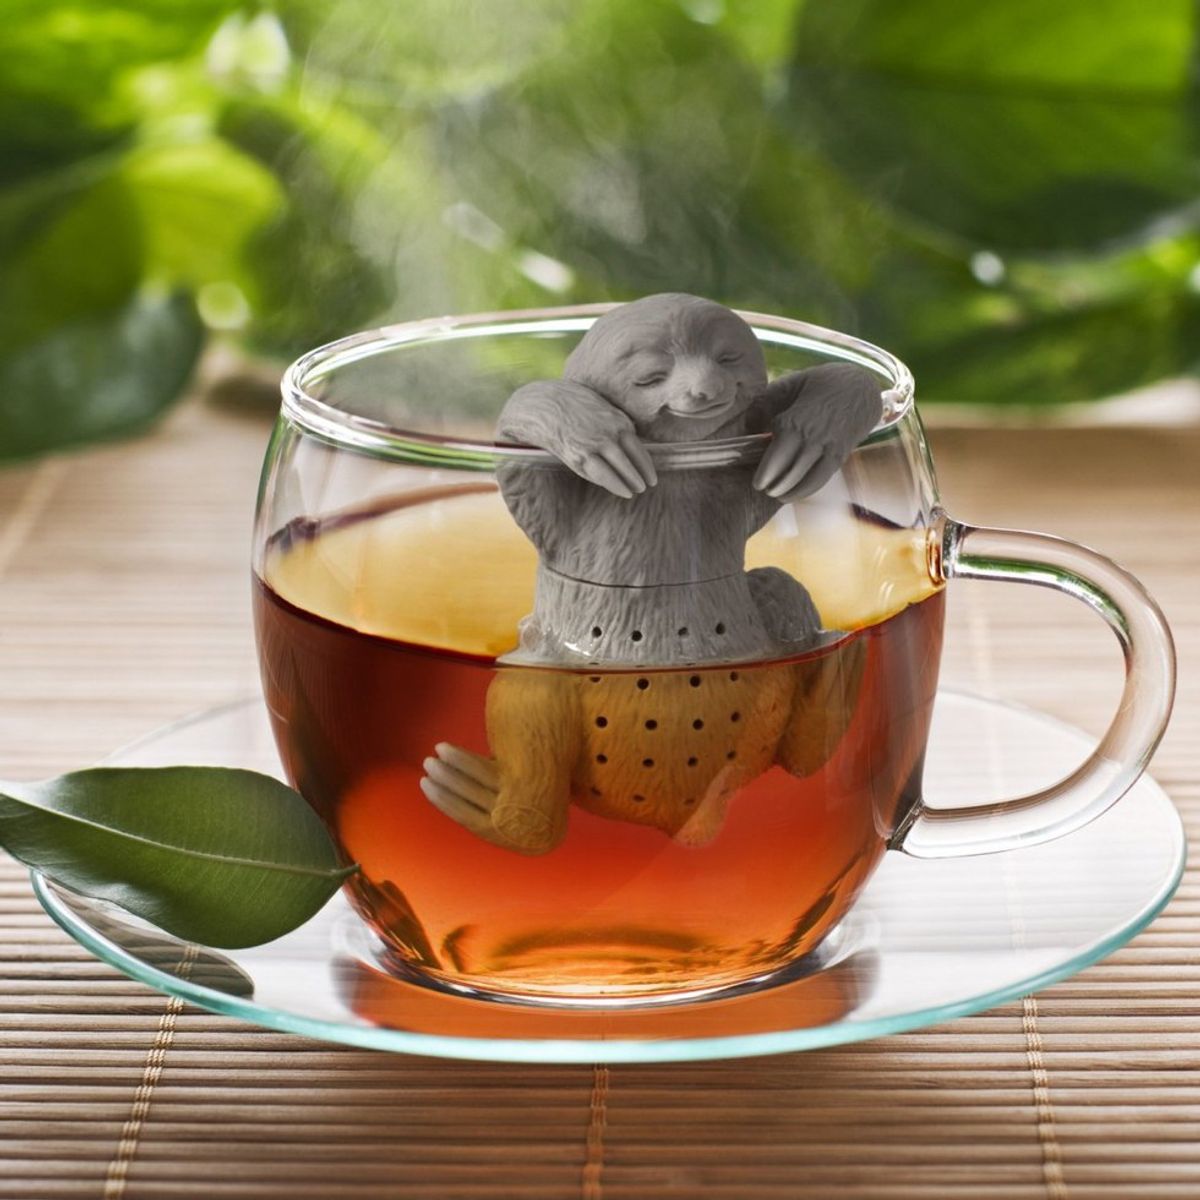 14 Things All Tea-Lovers Know to be True